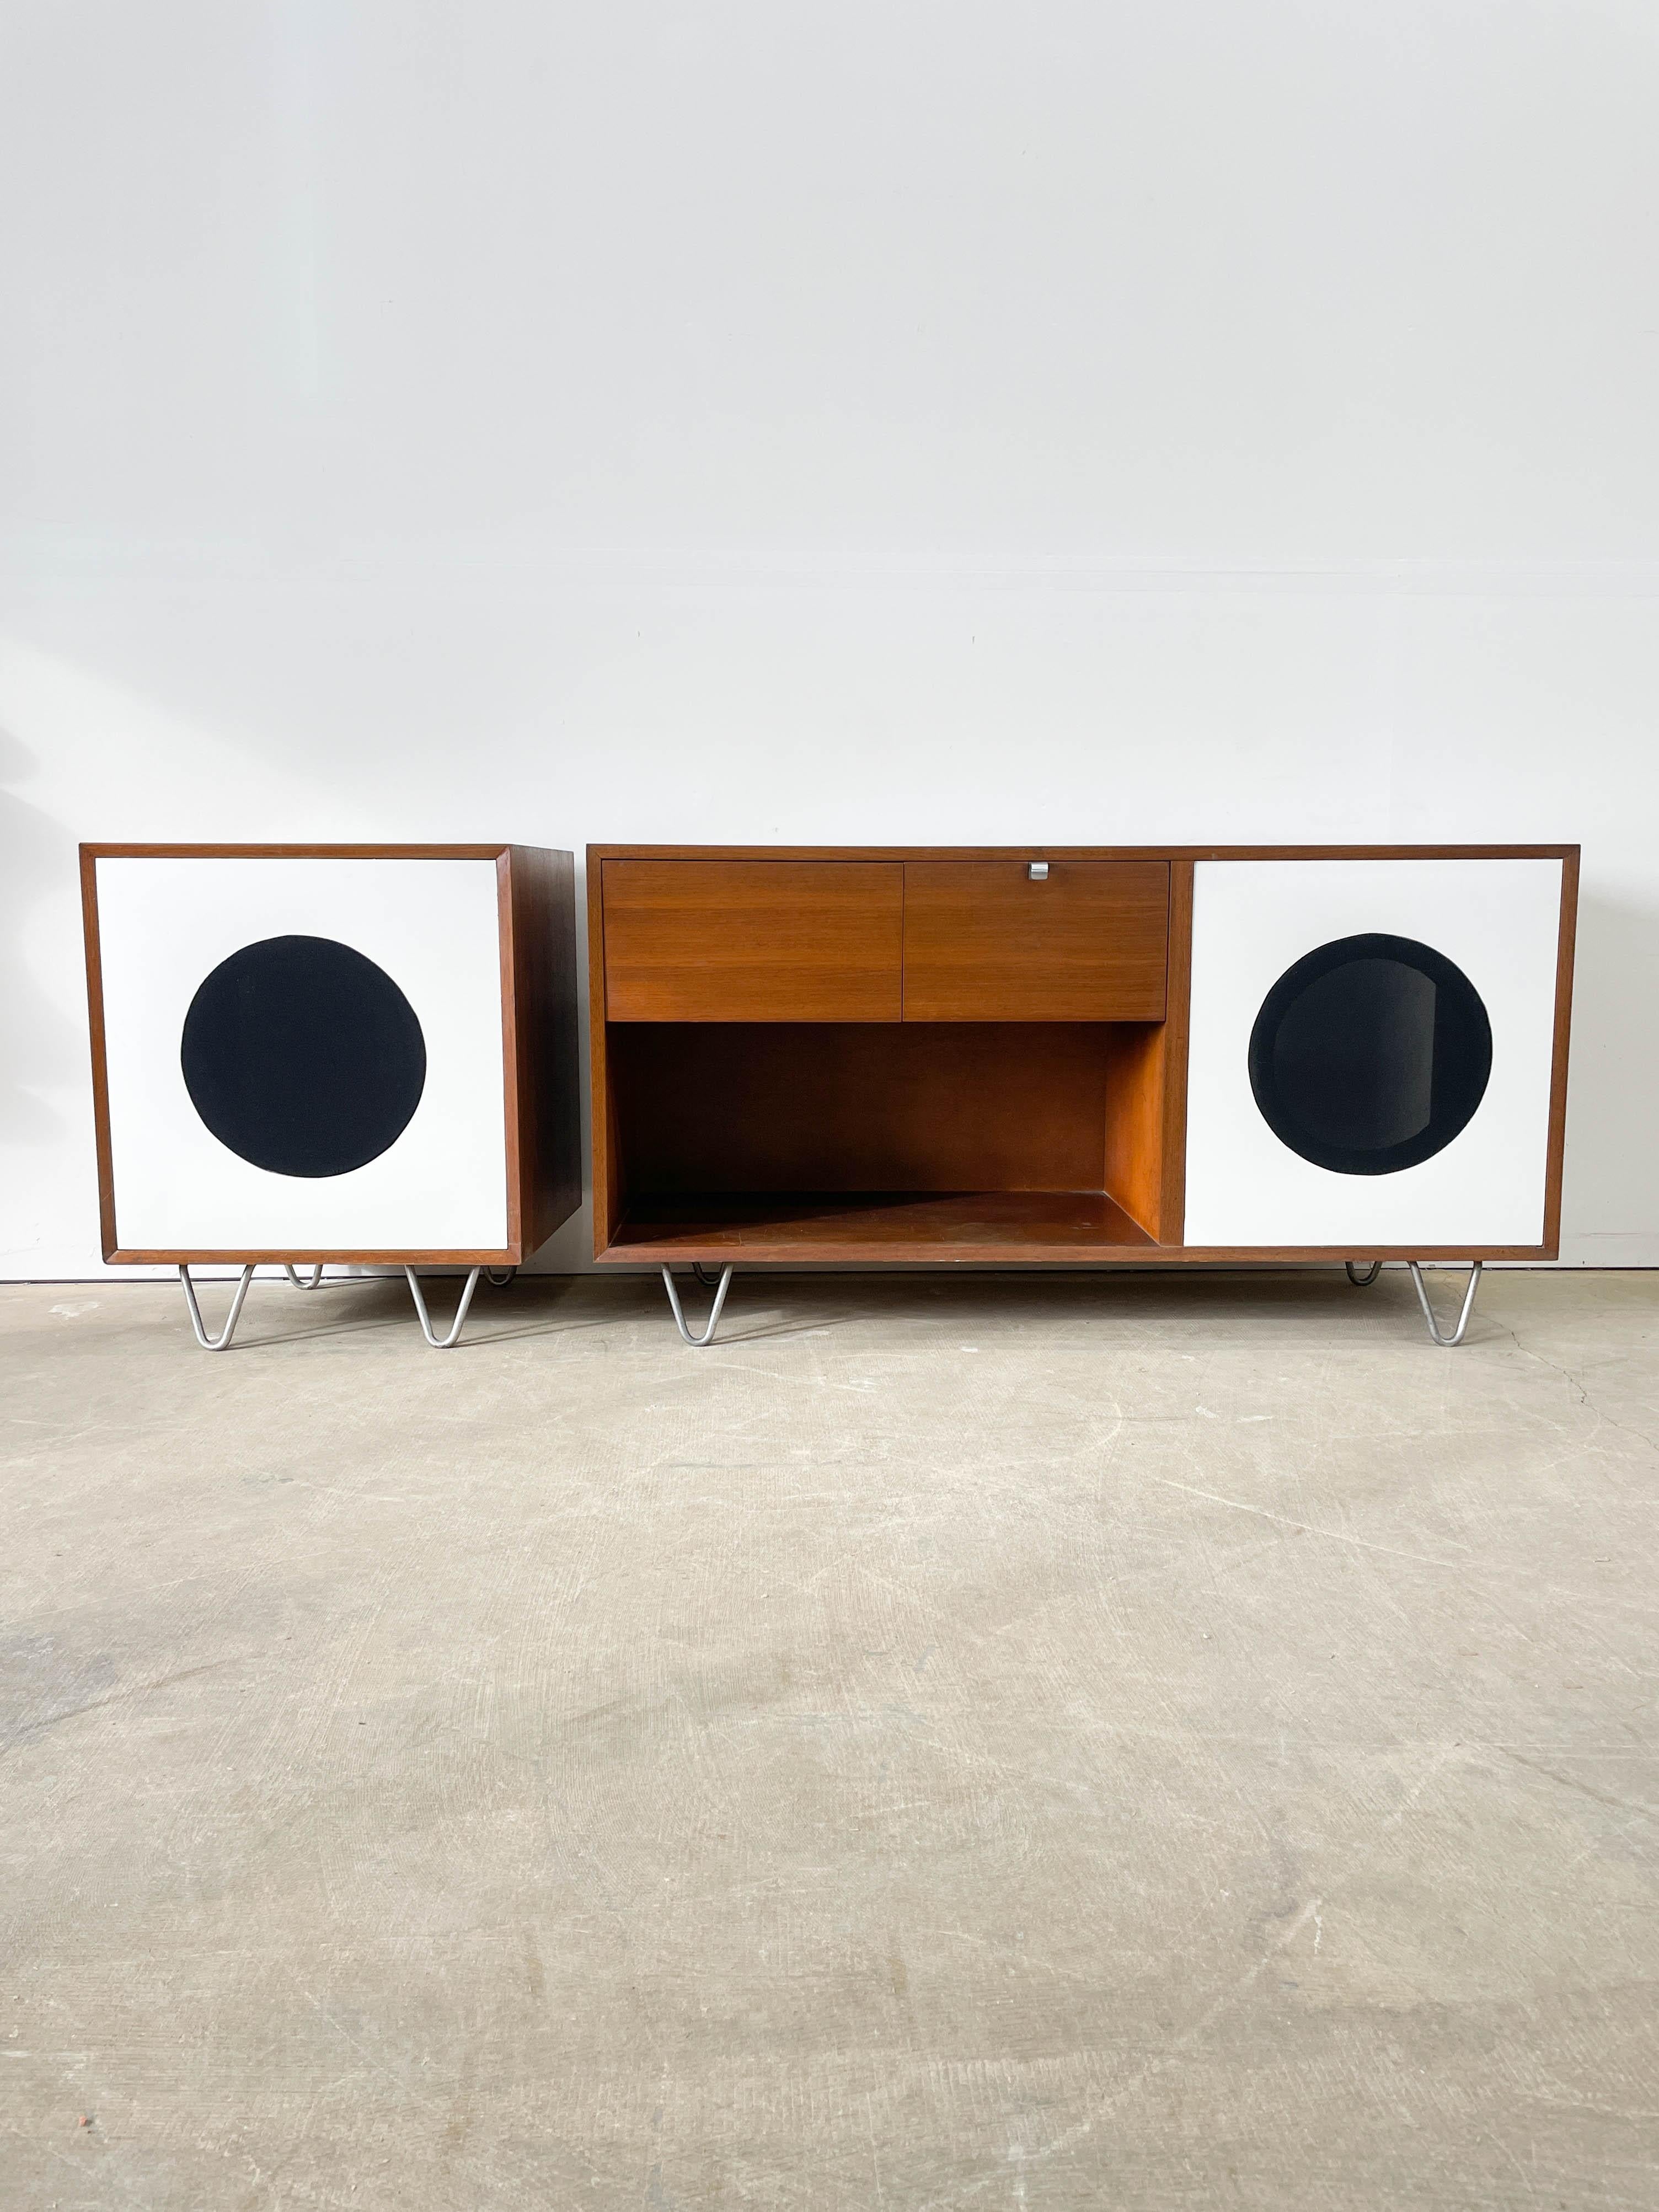 This is a classic George Nelson minimalist record player cabinet and satellite speaker cab from the Basic Cabinet Series (BCS) group of the 1940s. Made by Herman Miller with beautiful walnut cases, iconic hairpin legs and original hardware. These